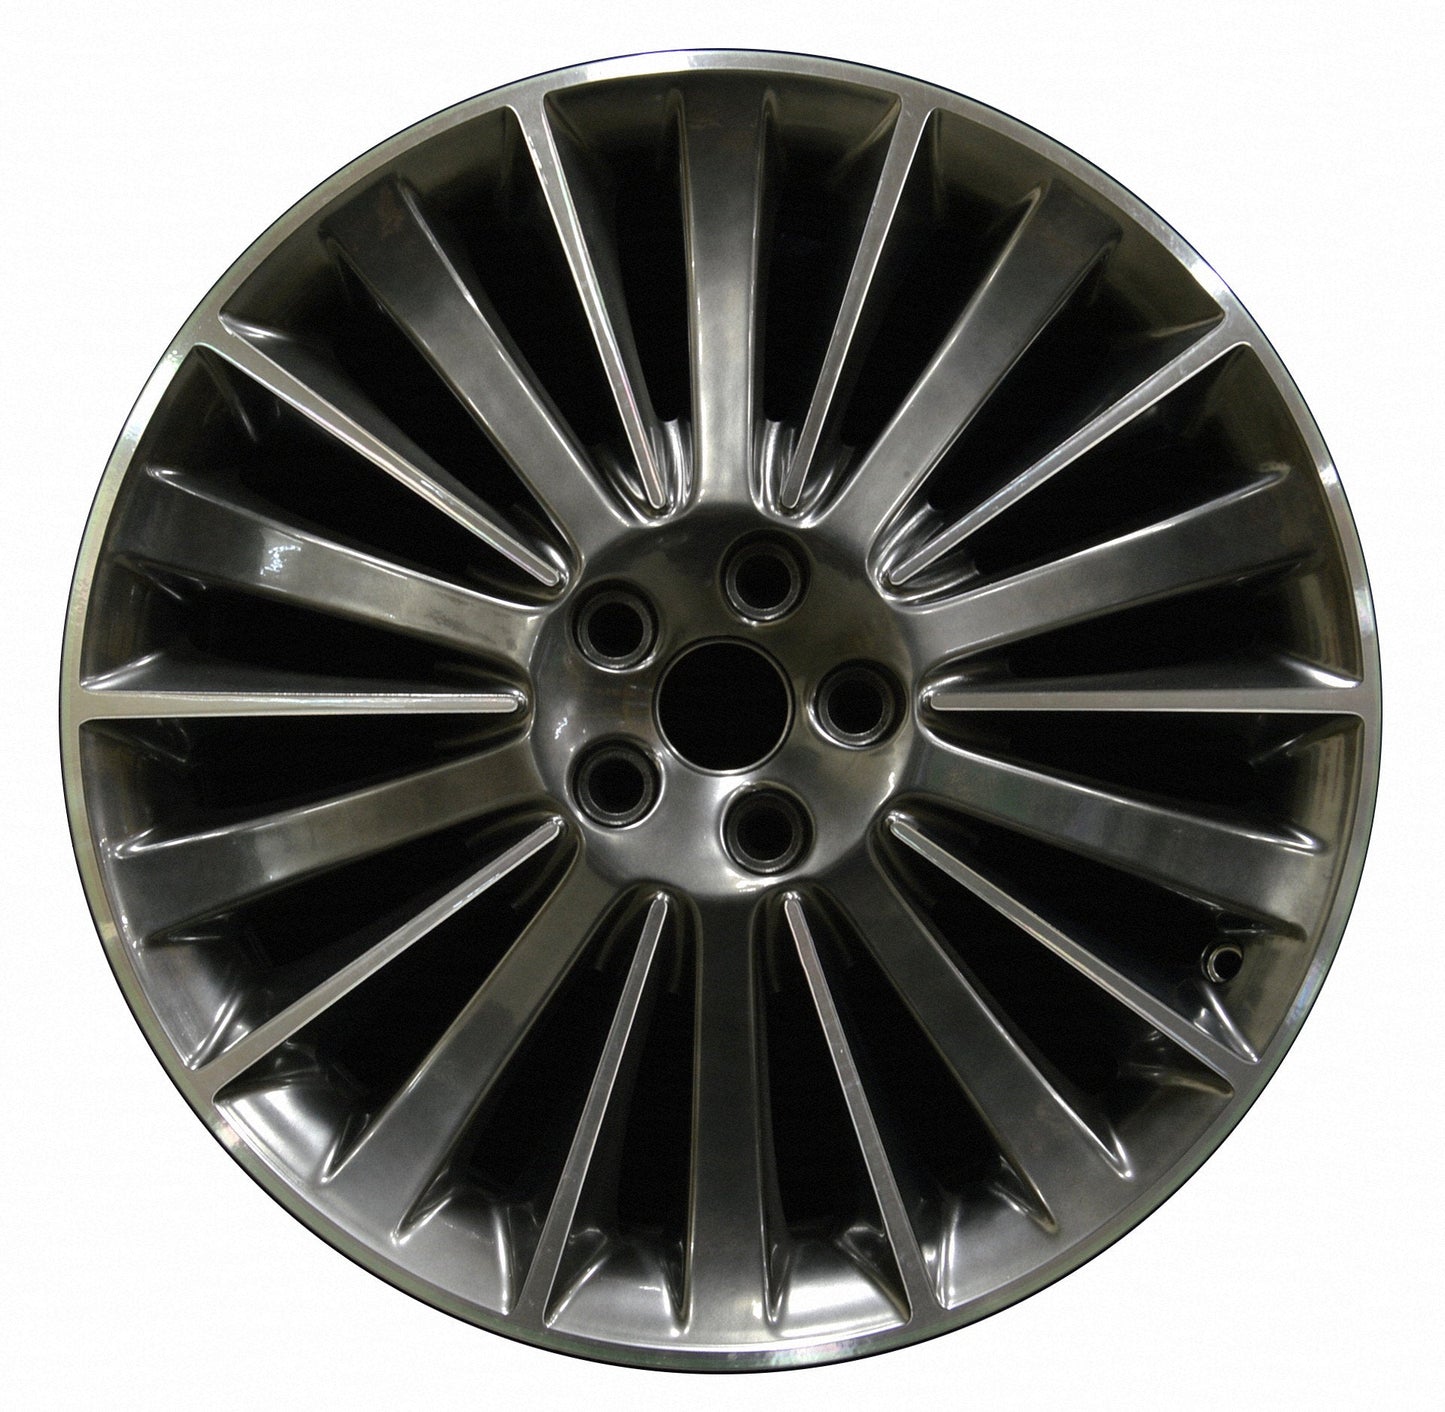 Lincoln MKZ  2013, 2014, 2015, 2016 Factory OEM Car Wheel Size 19x8 Alloy WAO.3955.HYPV3.MABRT